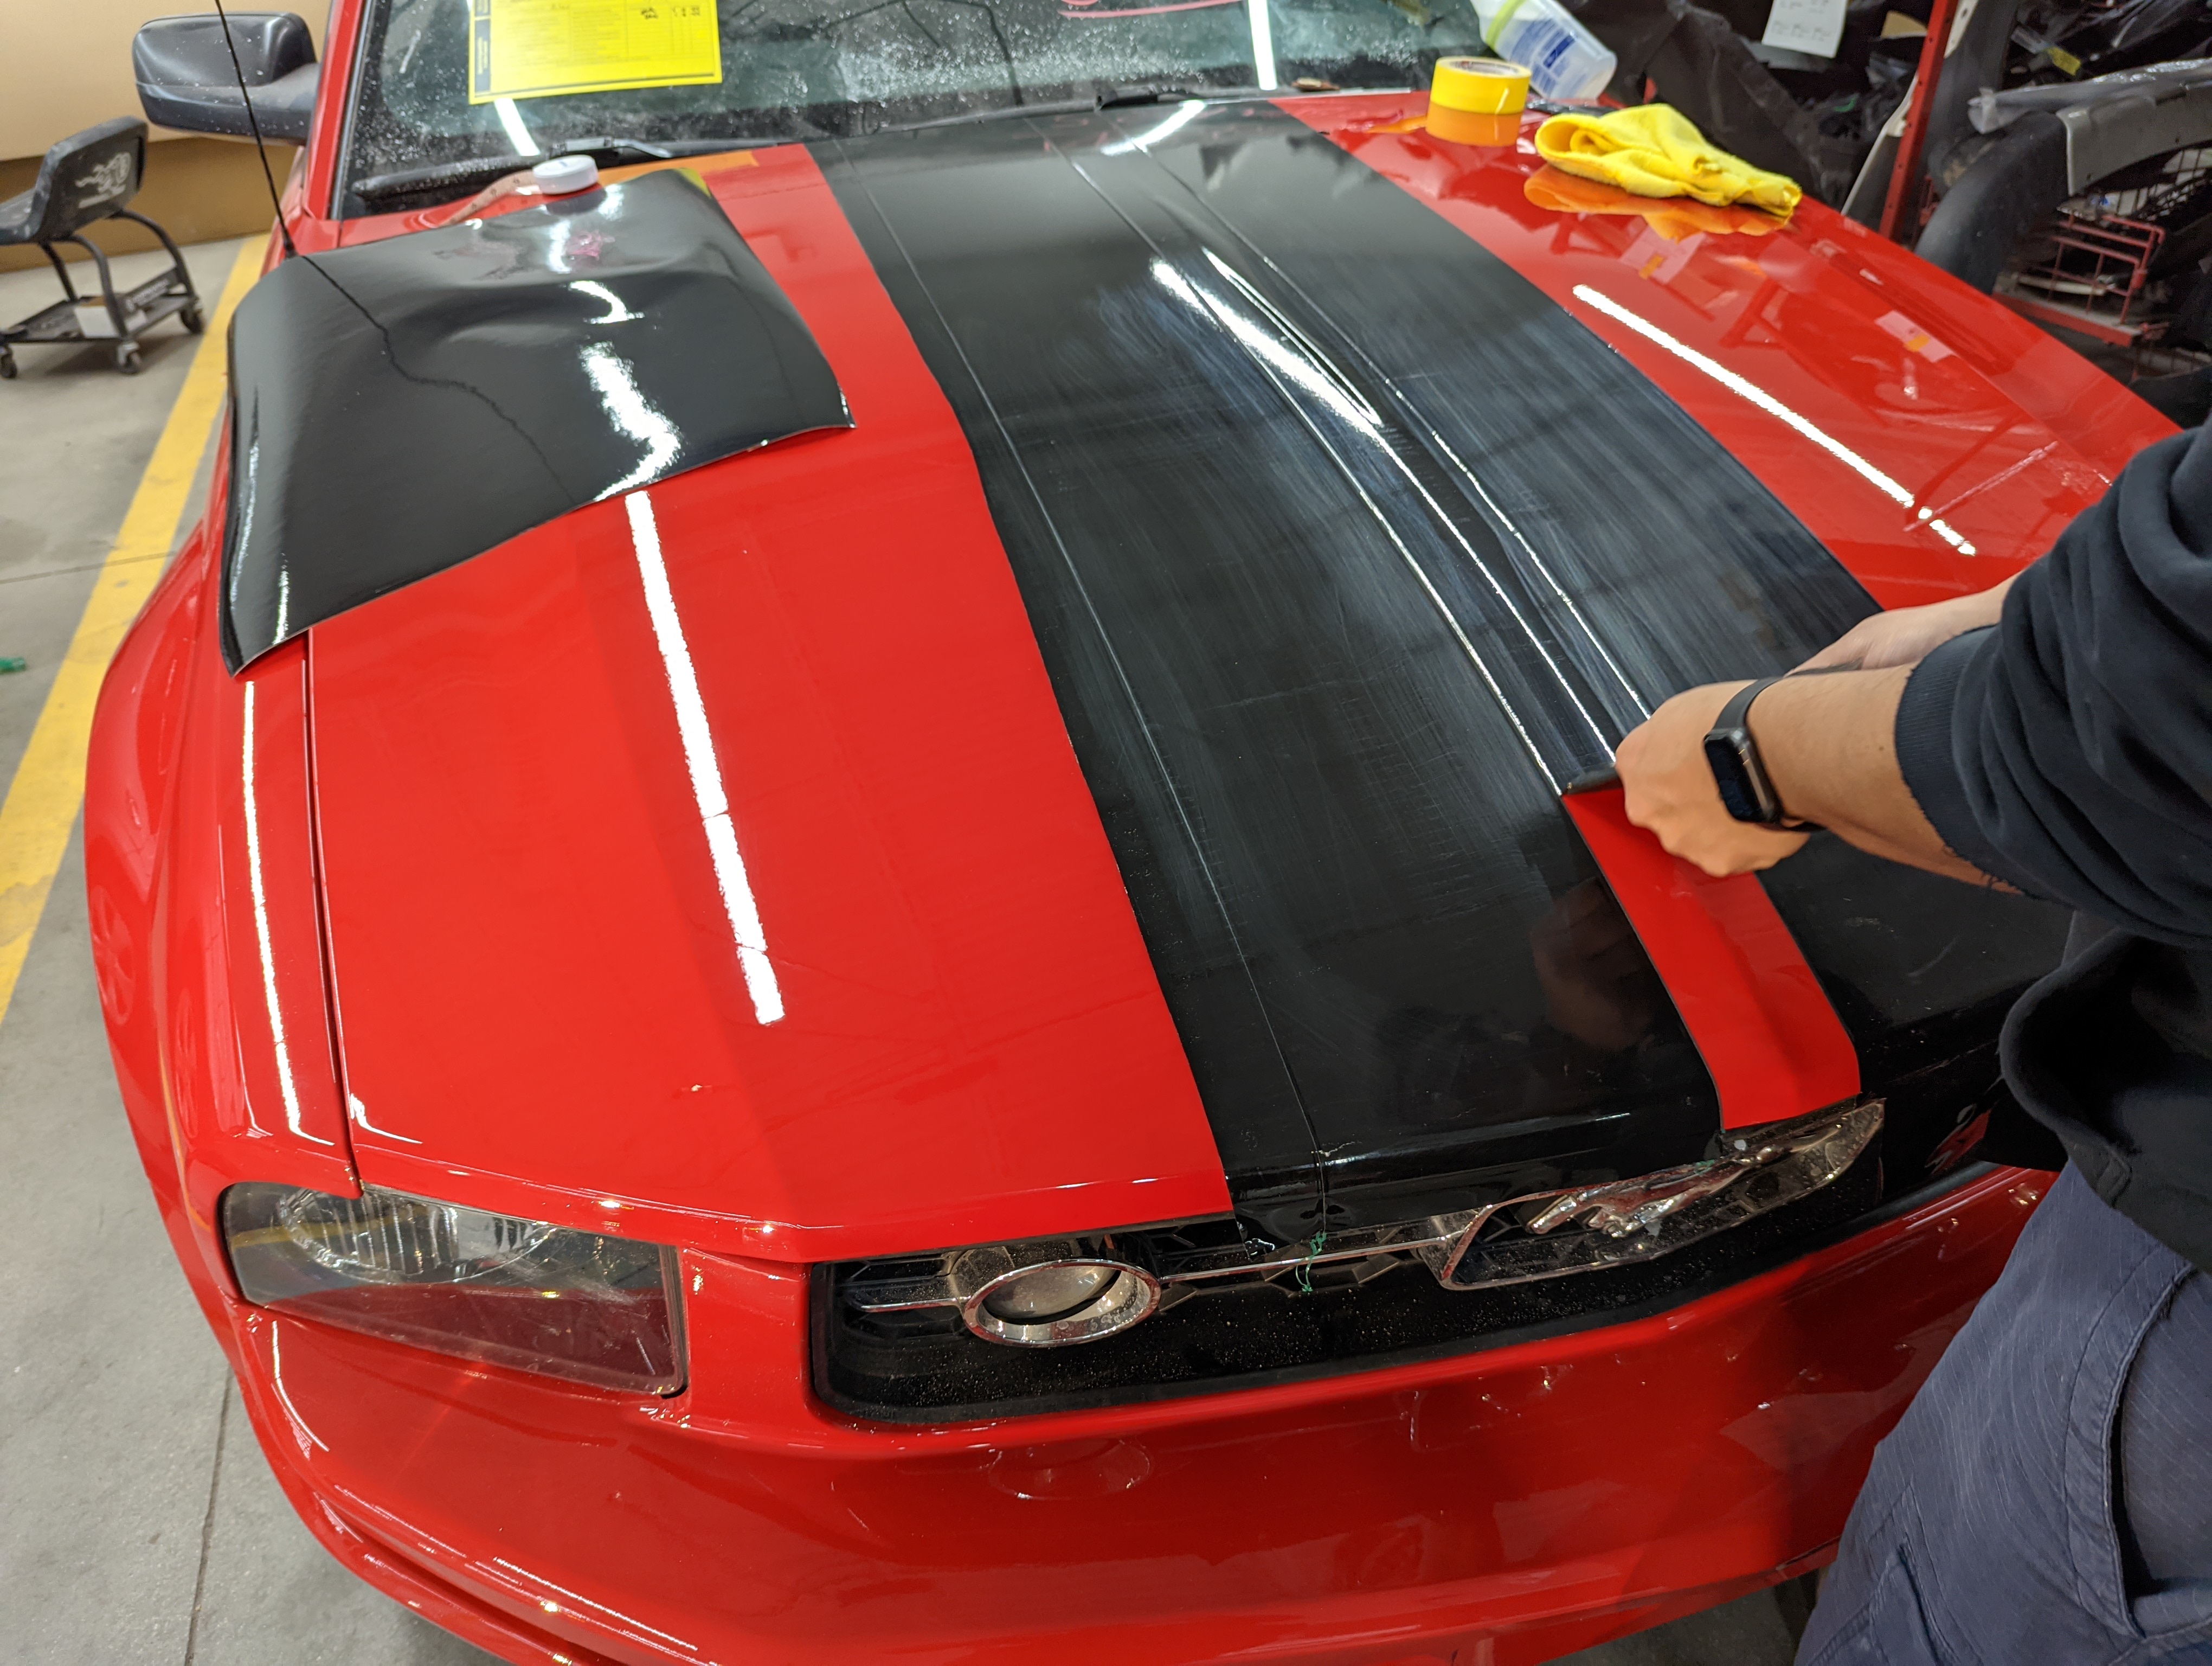 2006 Ford Mustang Vinyl Stripes. Removing the excess vinyl after cutting with knife-less tape.